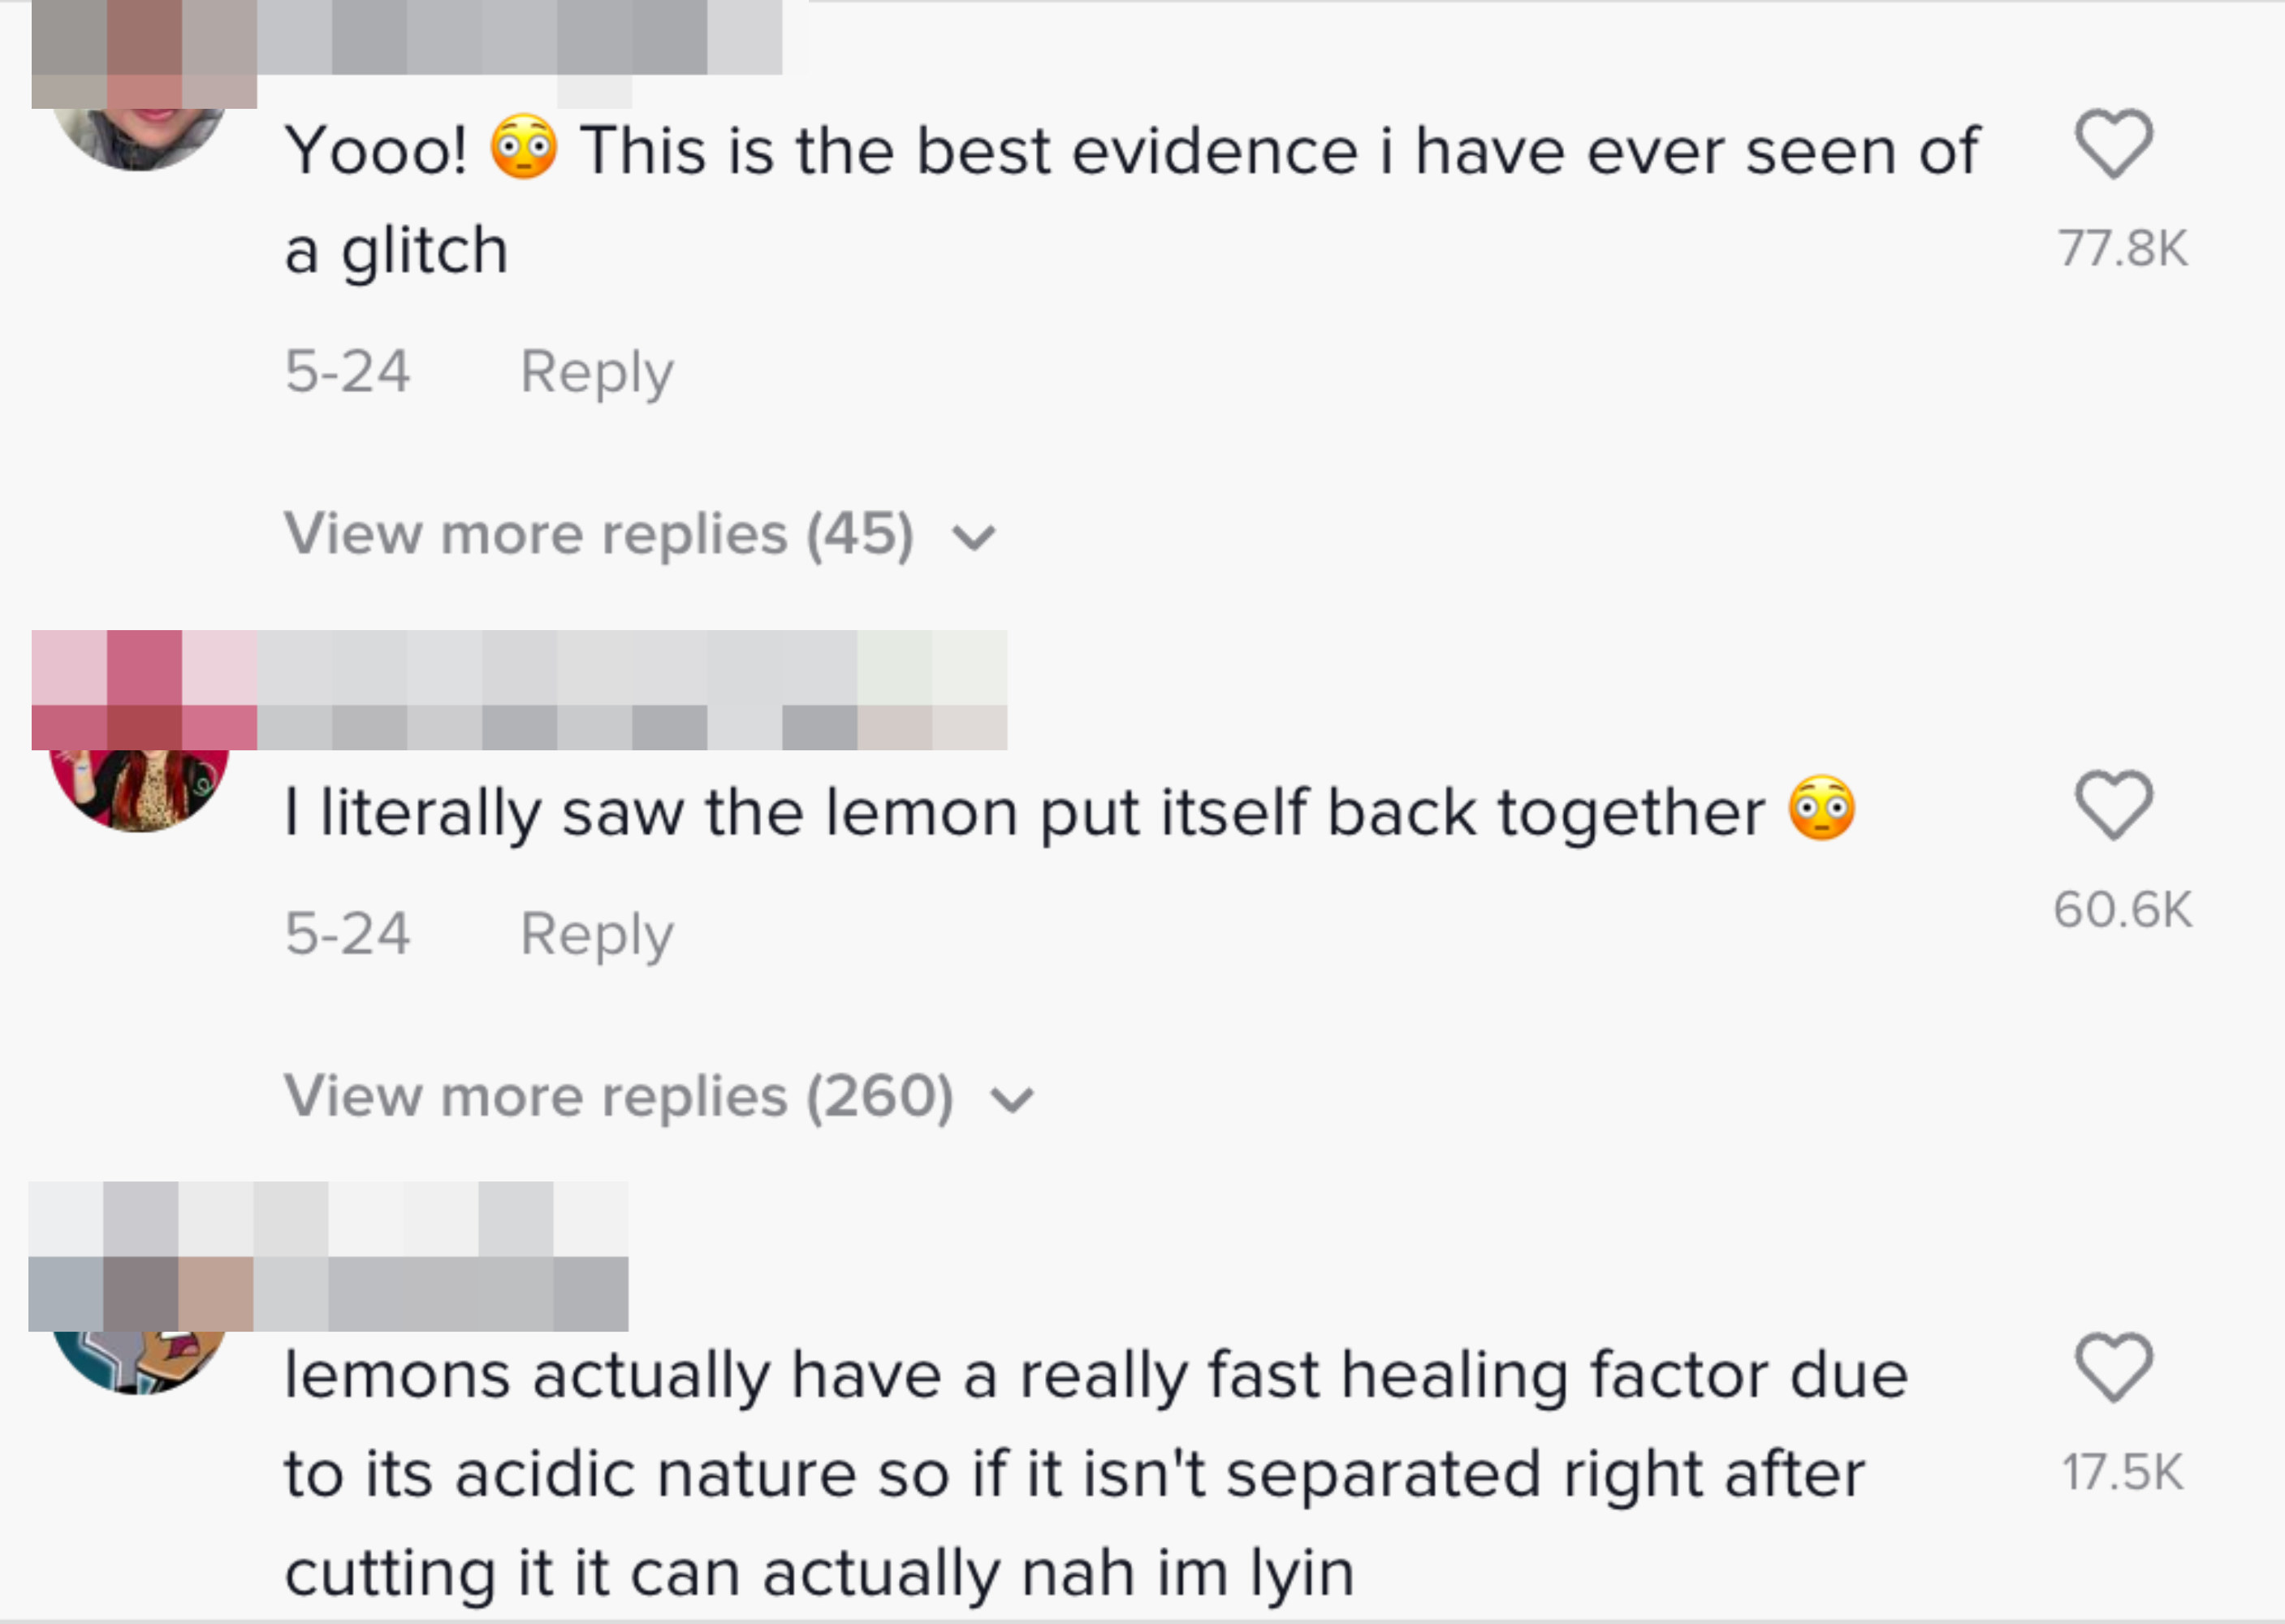 &quot;I literally saw the lemon put itself back together&quot; and &quot;lemons have a really fast healing factor due to its acidic nature&quot;